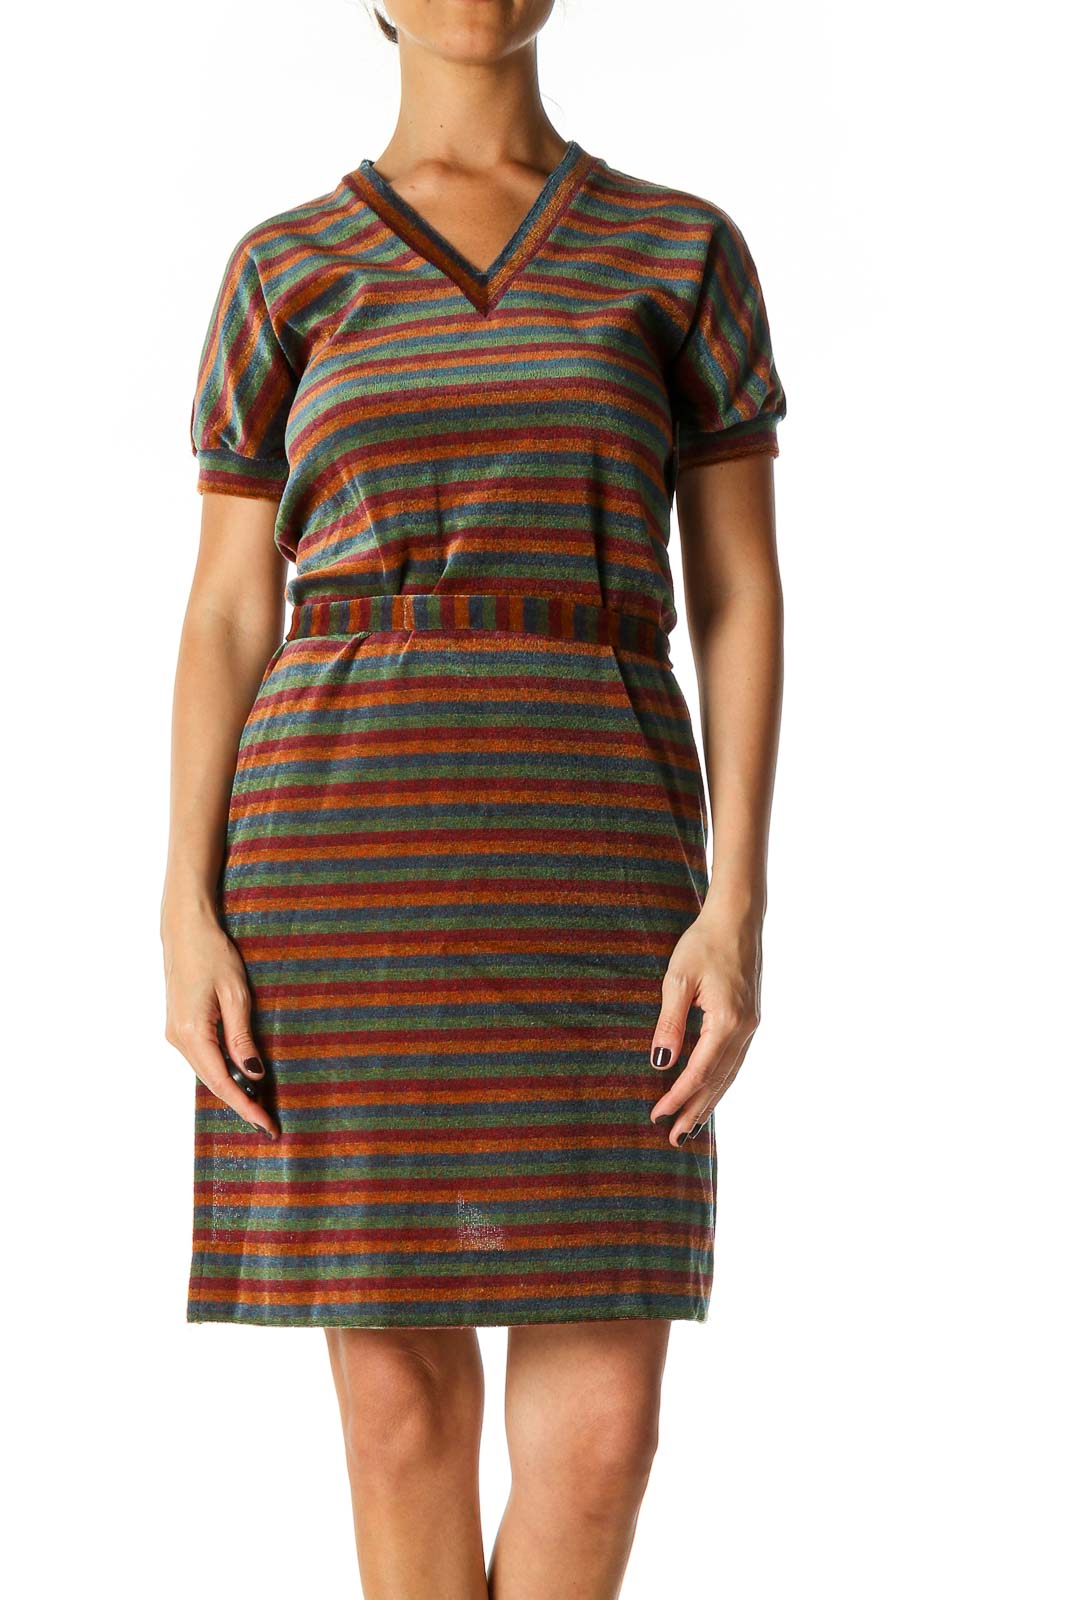 Brown Striped Casual Sheath Dress Front